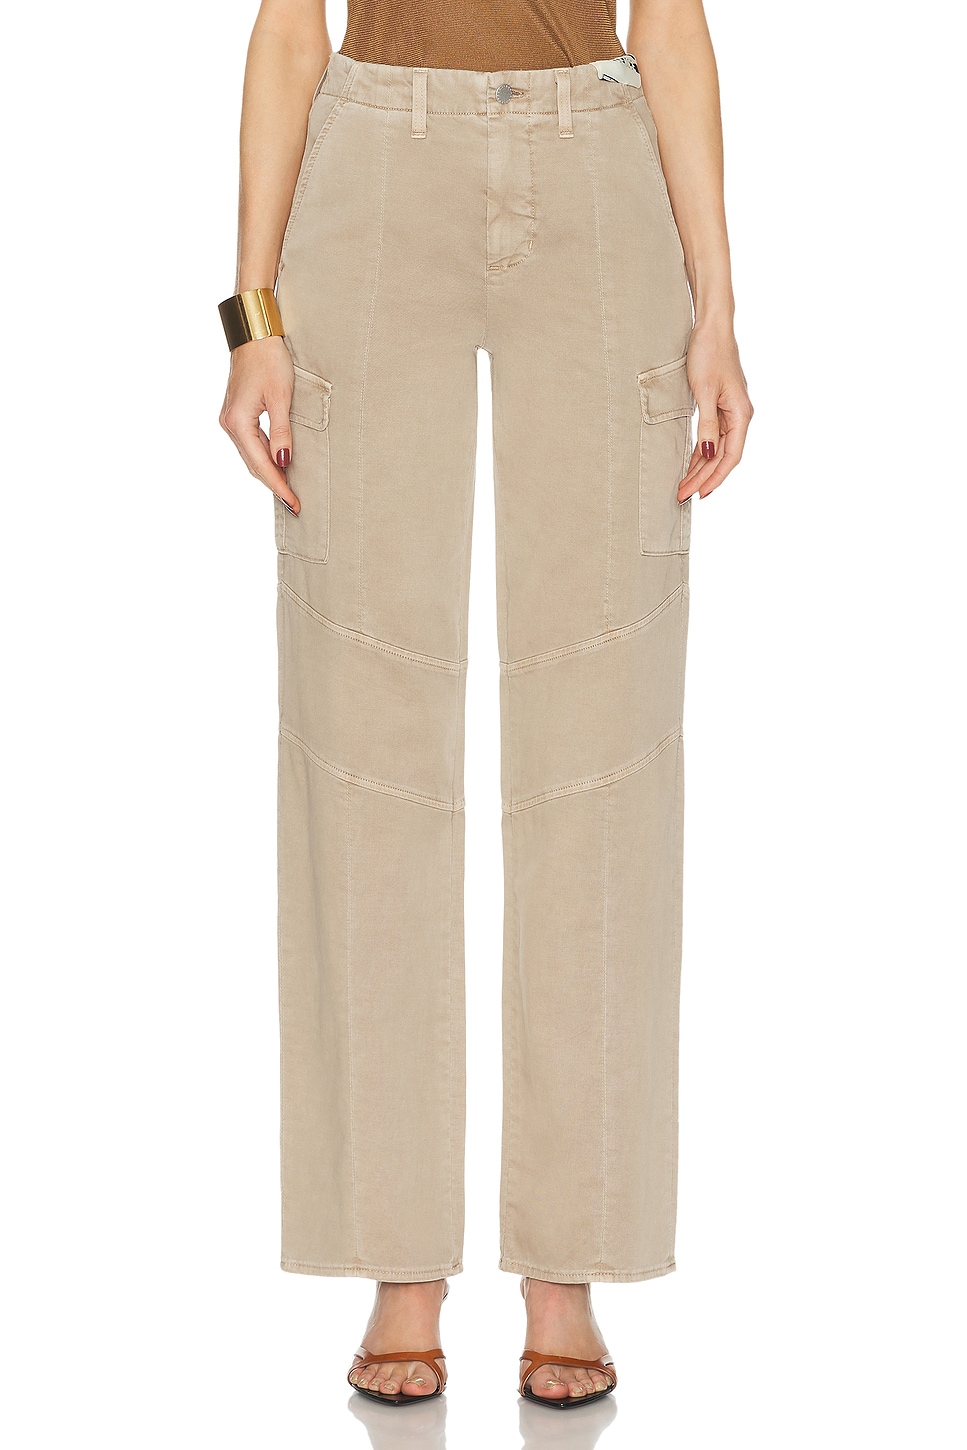 Image 1 of L'AGENCE Brooklyn Utility Wide Leg Pant in Rye